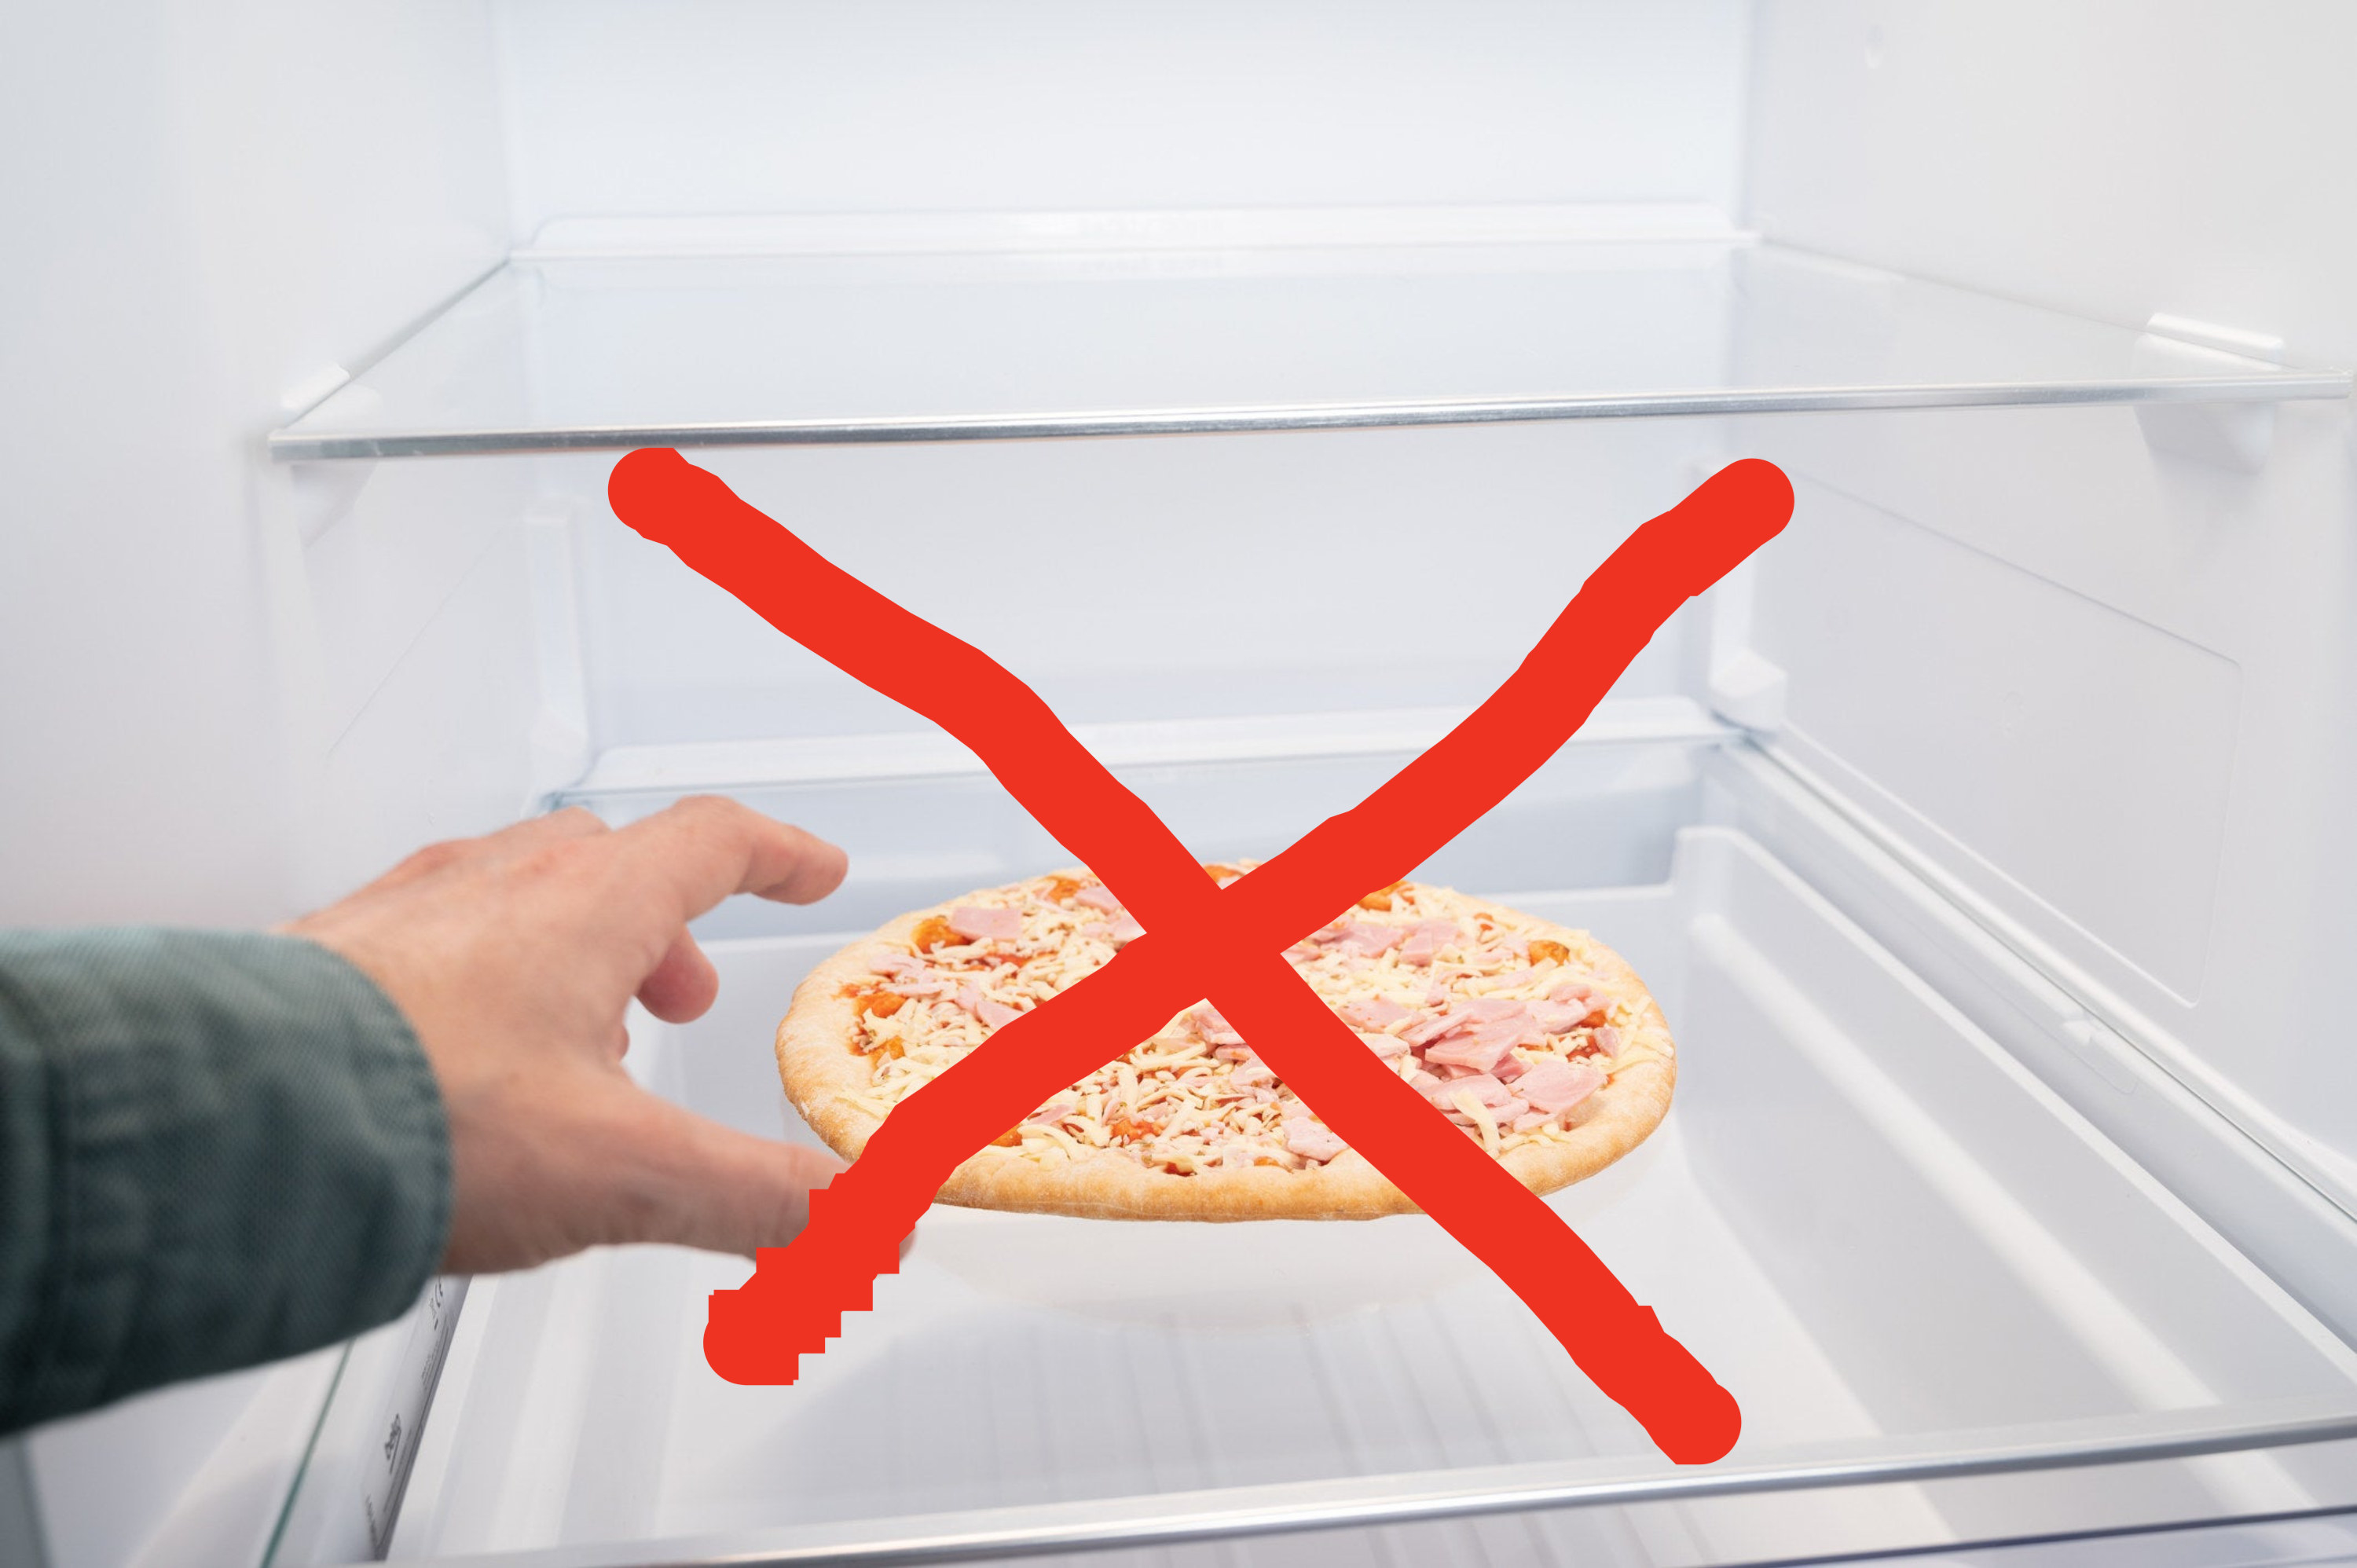 person reaching into a freezer for a frozen pizza